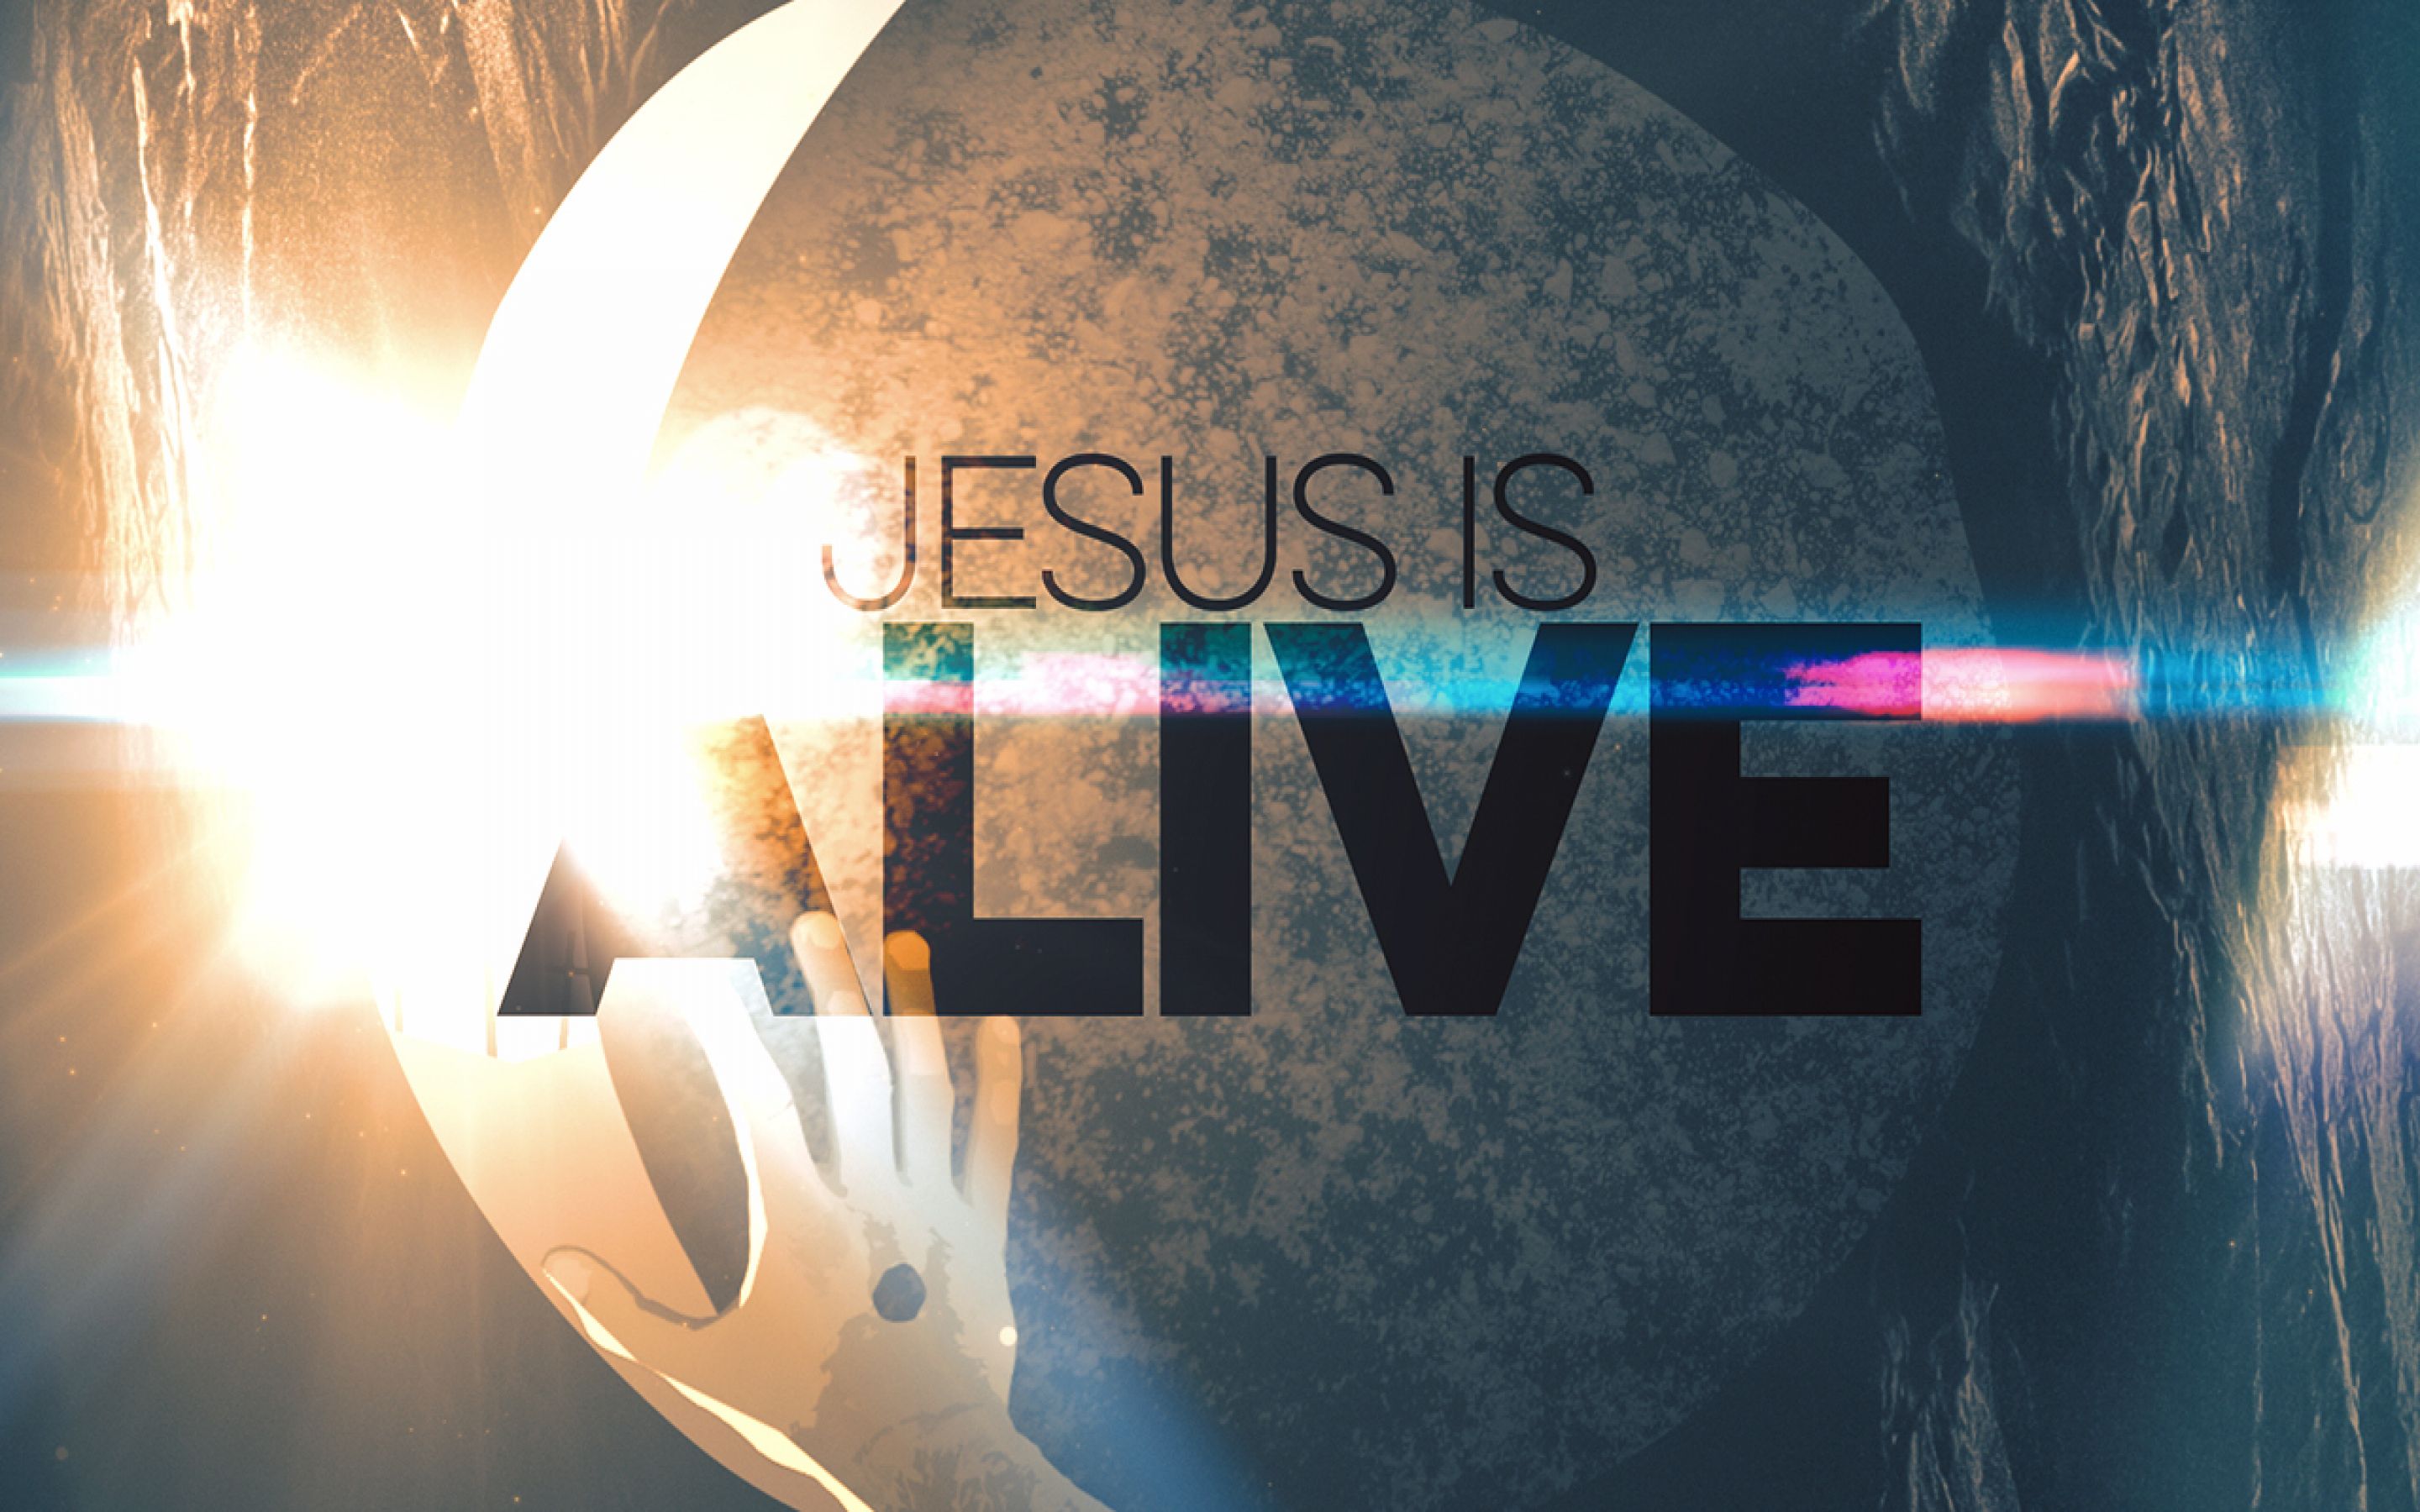 Happy Easter Wishes Resurrection Jesus Alive Risen From Dead HD Wallpaper